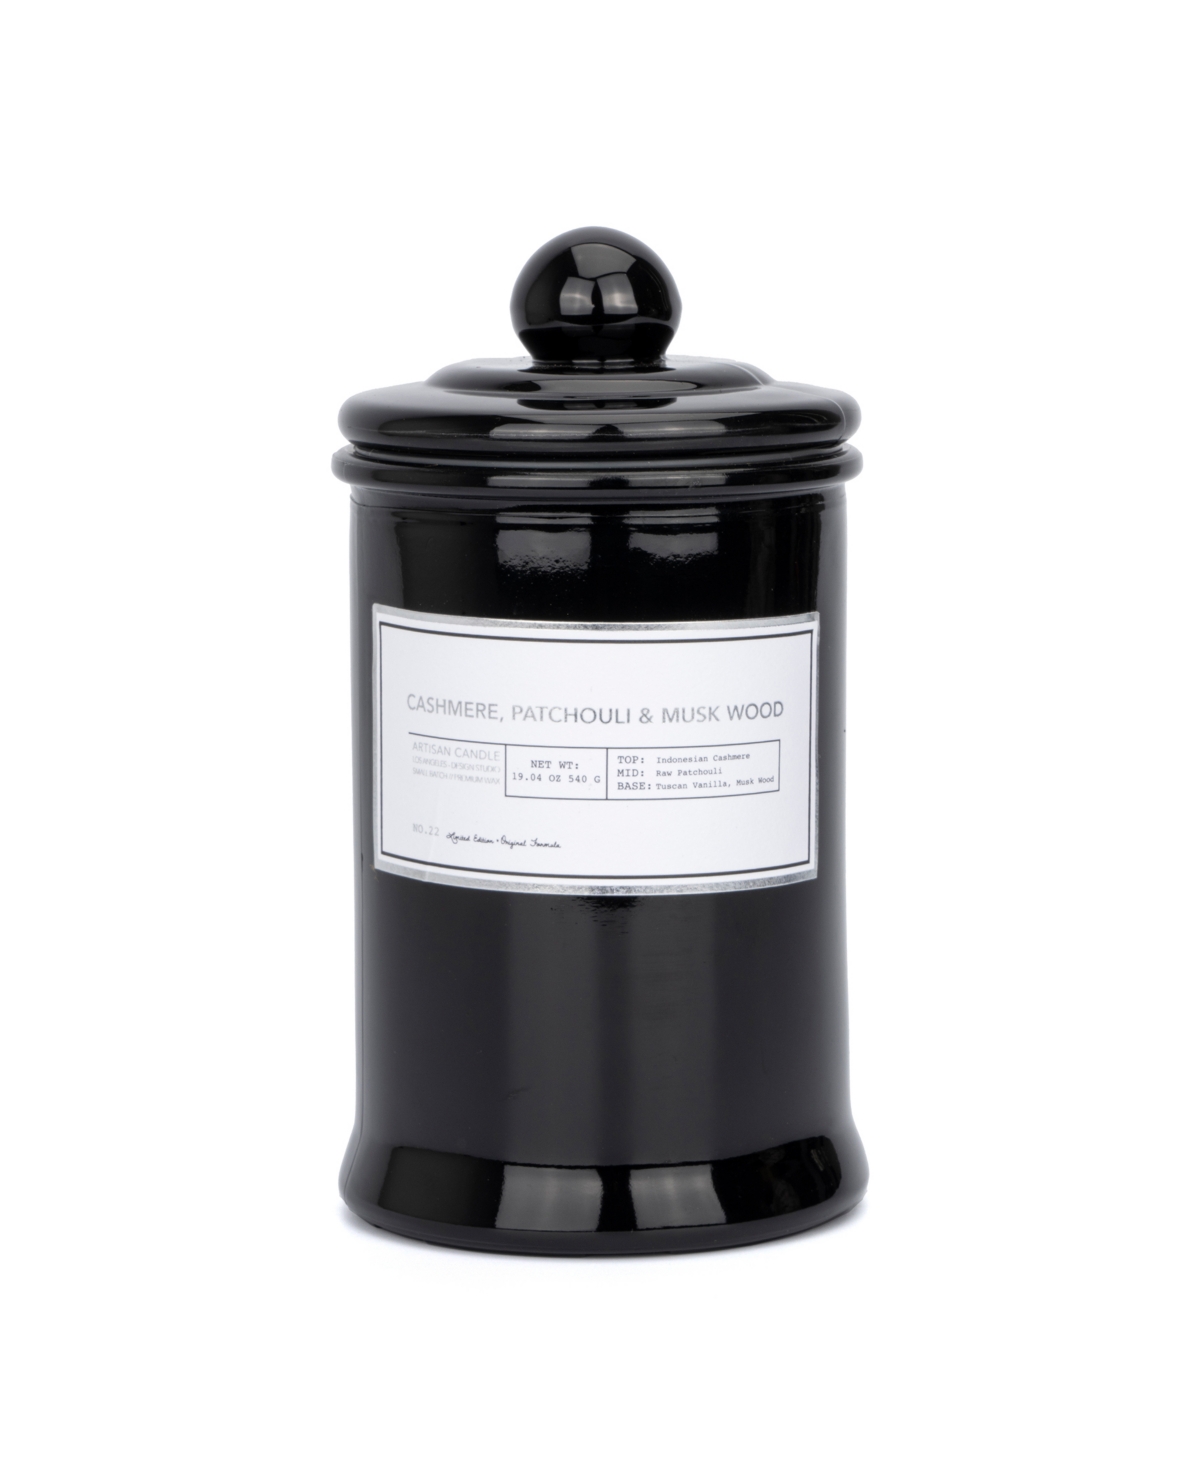 Hybrid & Company Cashmere Patchouli Scented Jar Candle In Black